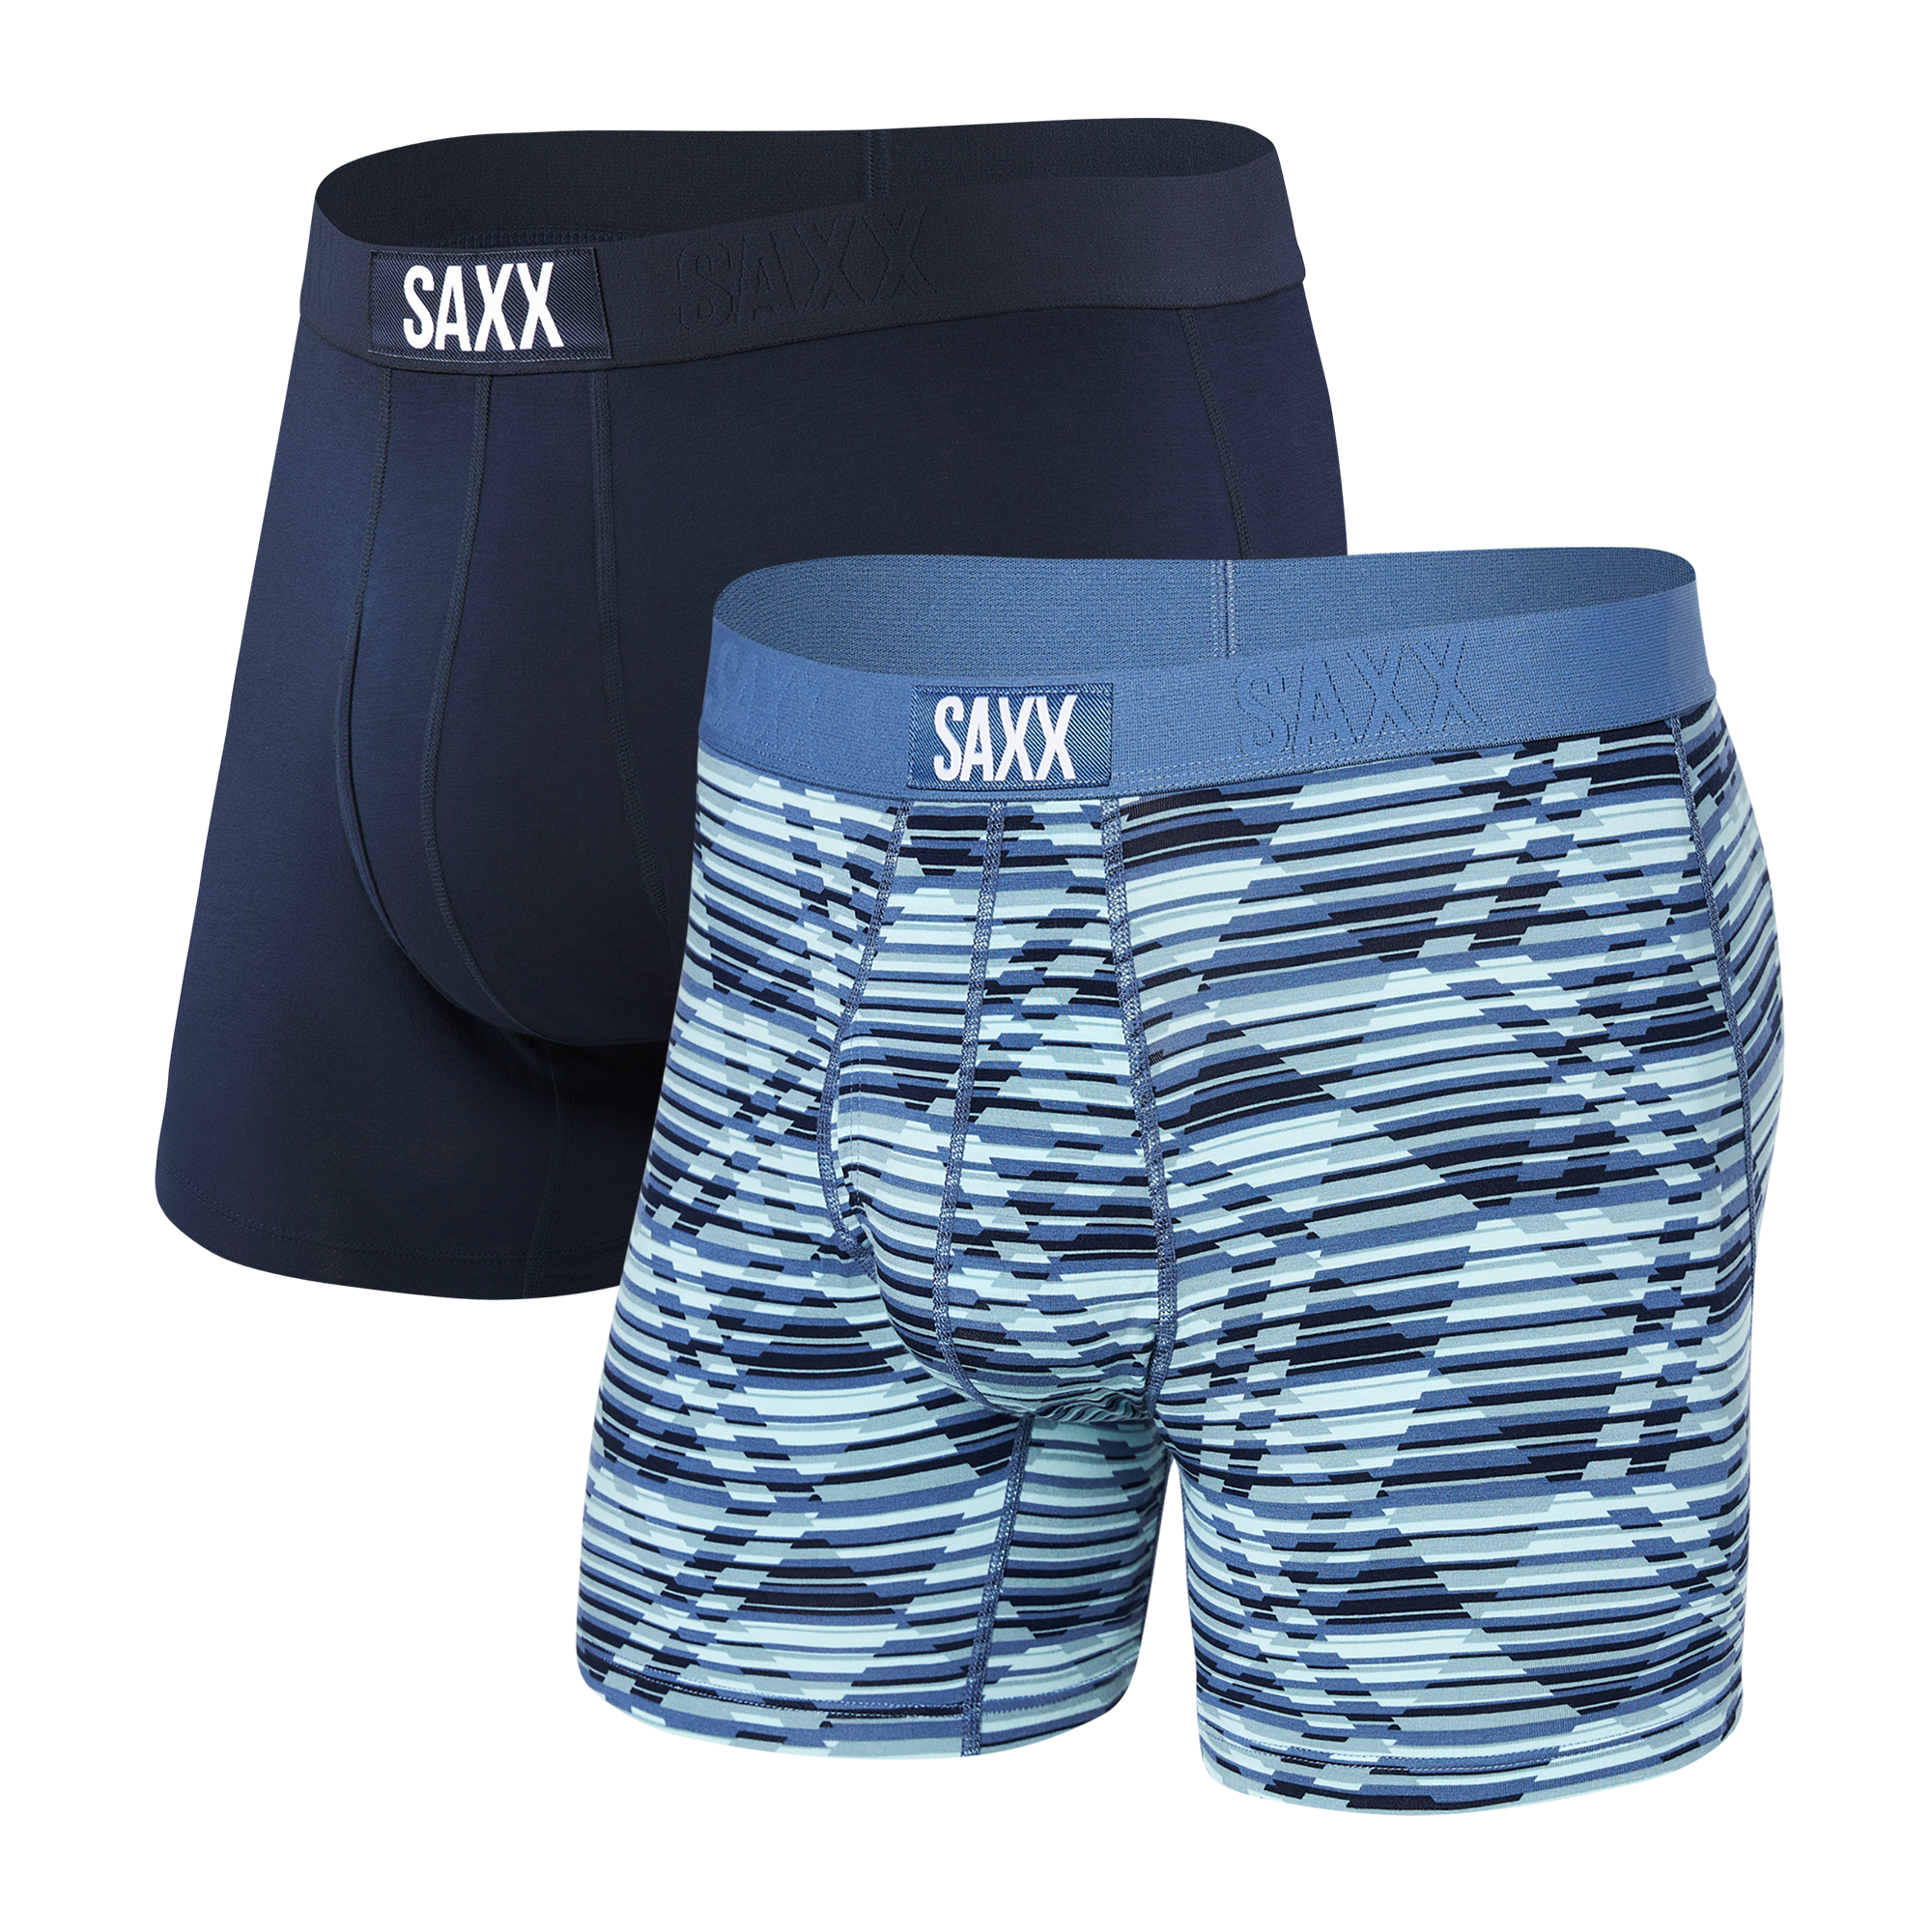 Safe-T-Gard 2 Pack Boxer Briefs w/Cage Cup Sz Youth Regular 55